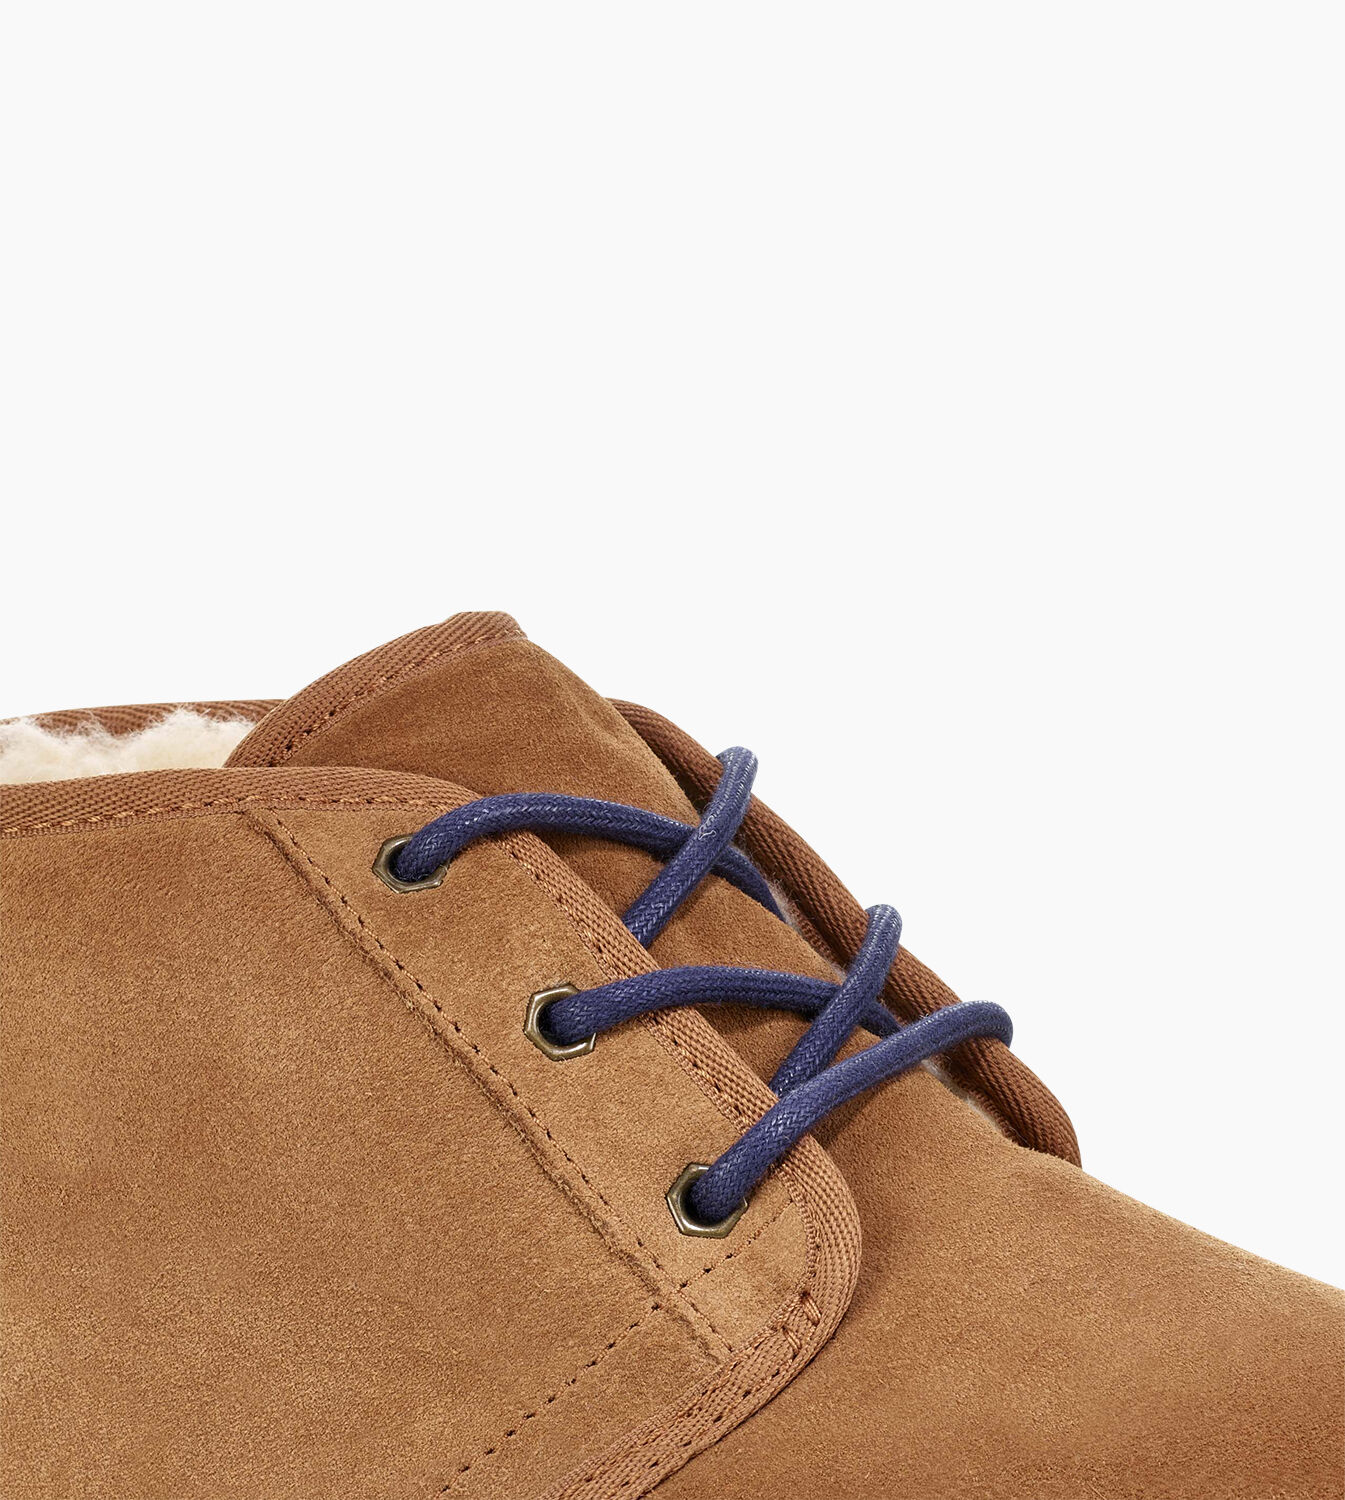 ugg boots with shoe strings